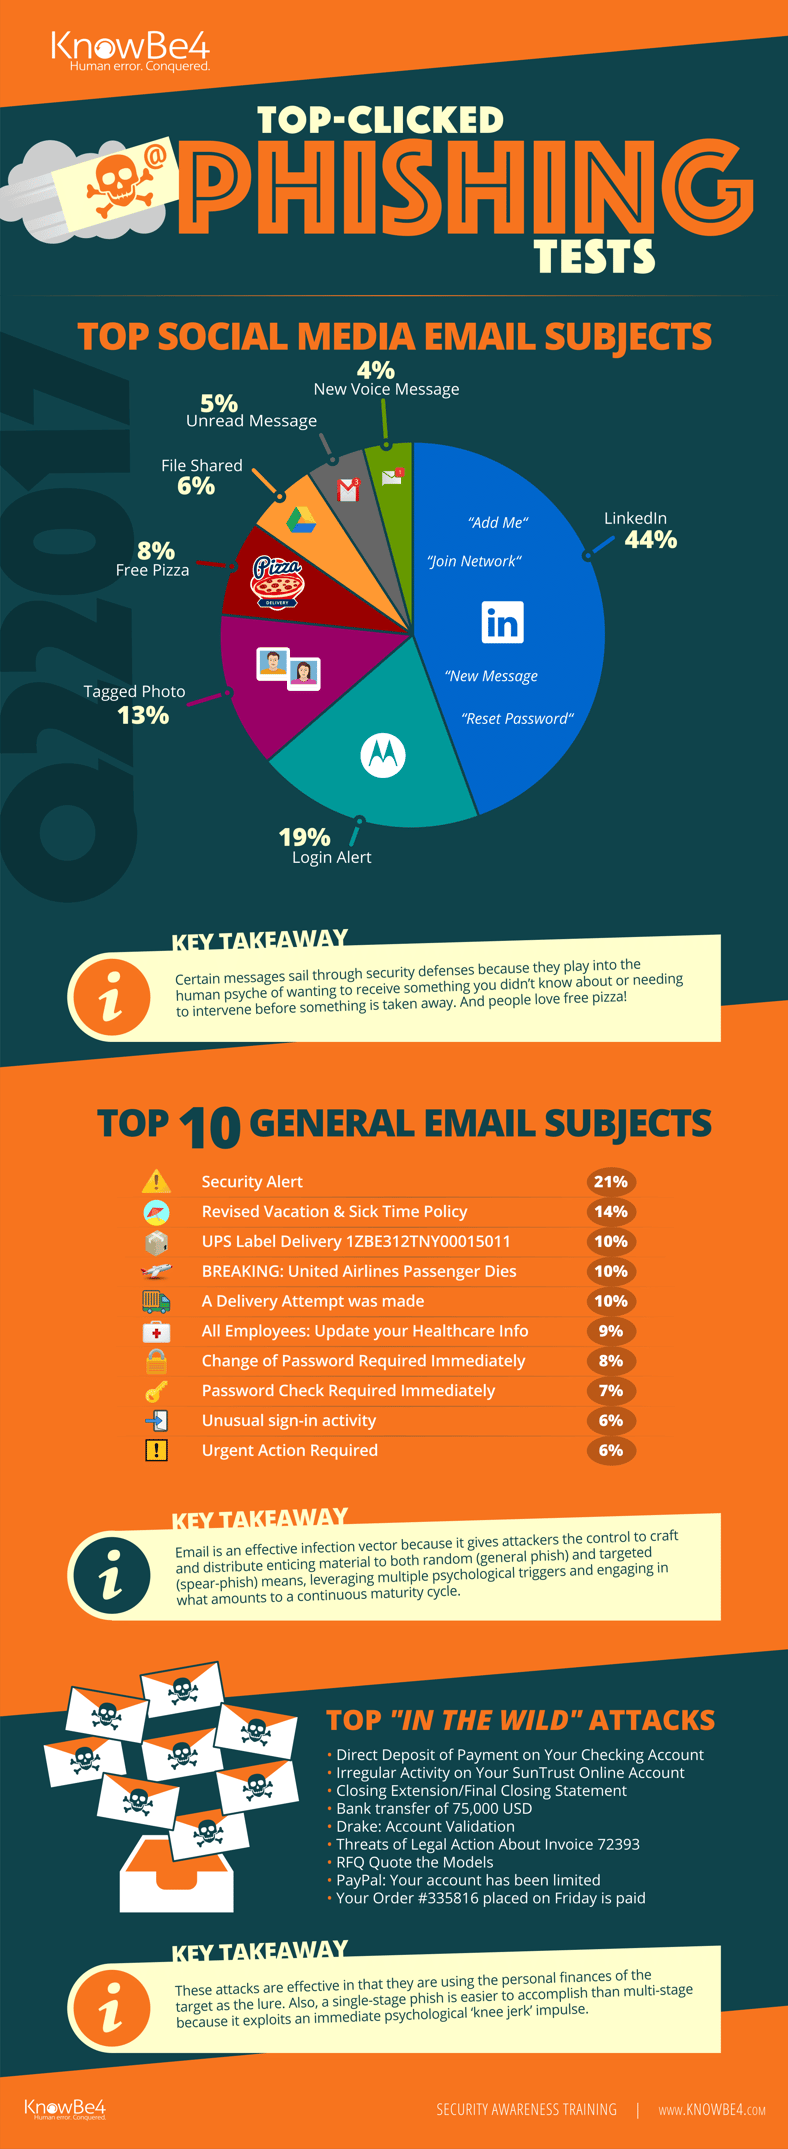 Q2-2017-Top-Clicked-Phishing-Emails